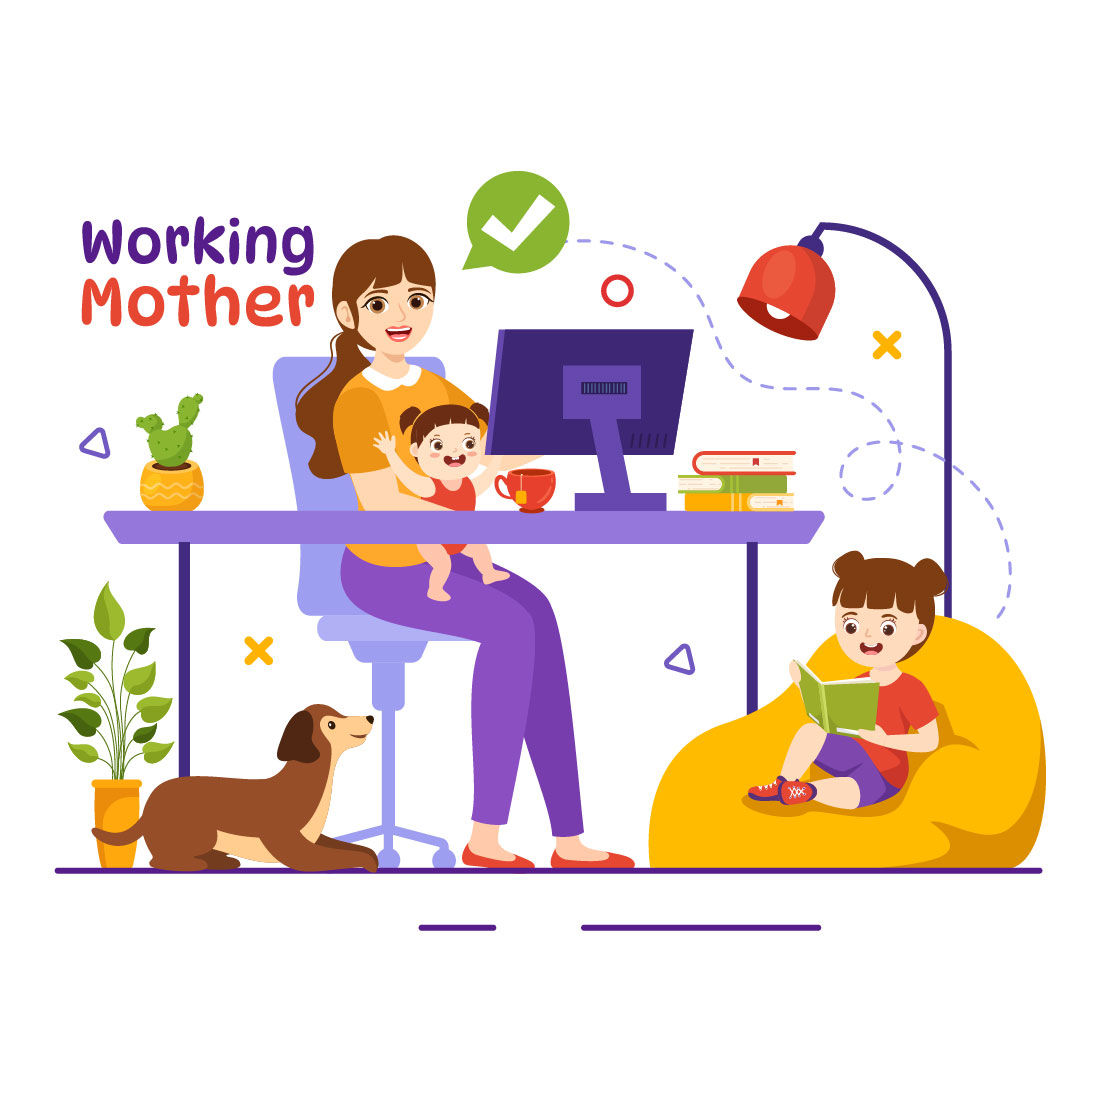 13 Working Mother Illustration cover image.